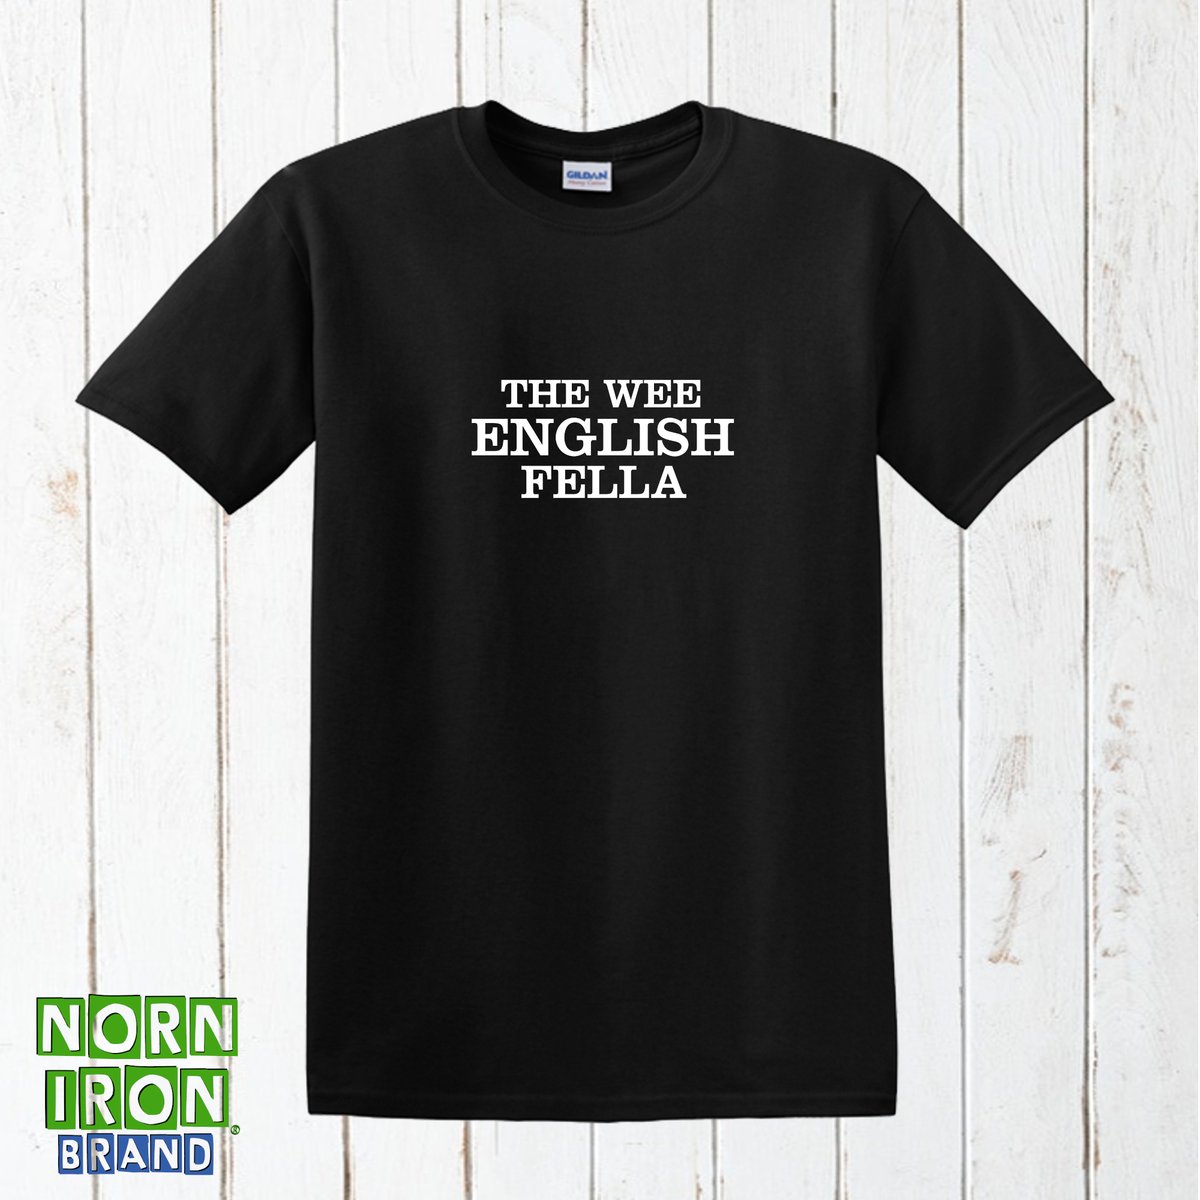 The Wee English Fella T Shirt Norn Iron Brand T Shirts Official Store